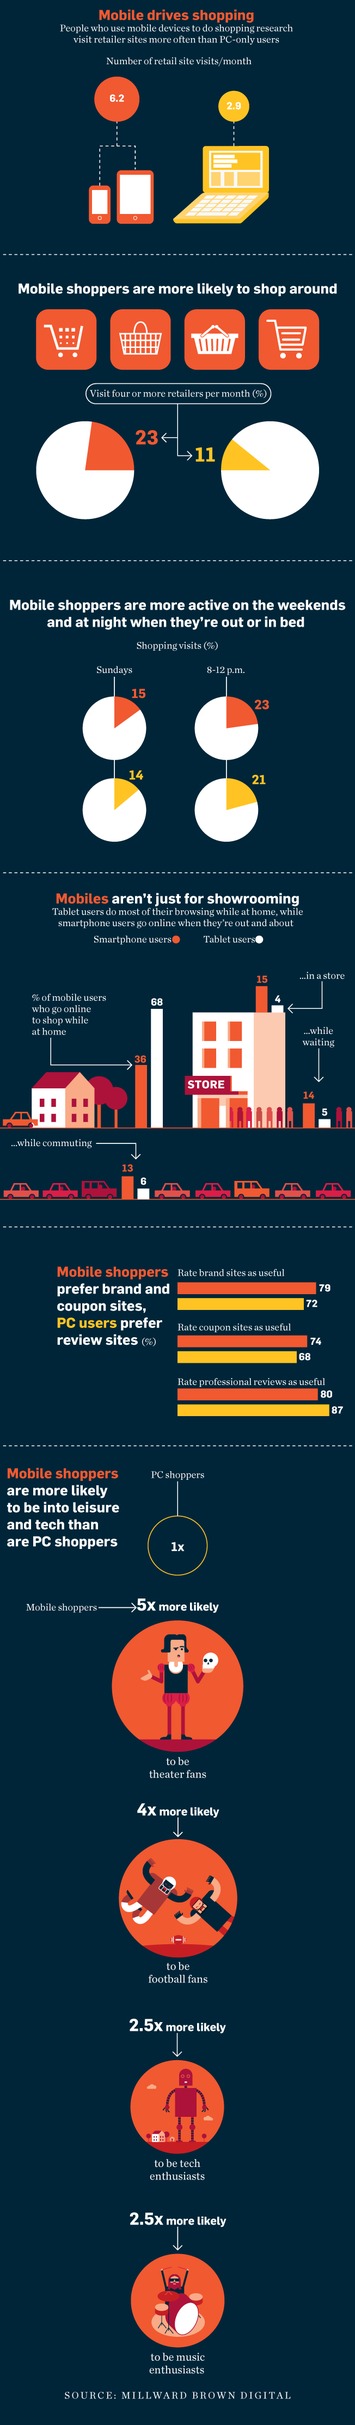 People Shopping on Mobile Devices Visit More Sites Than Those on a PC | A Marketing Mix | Scoop.it